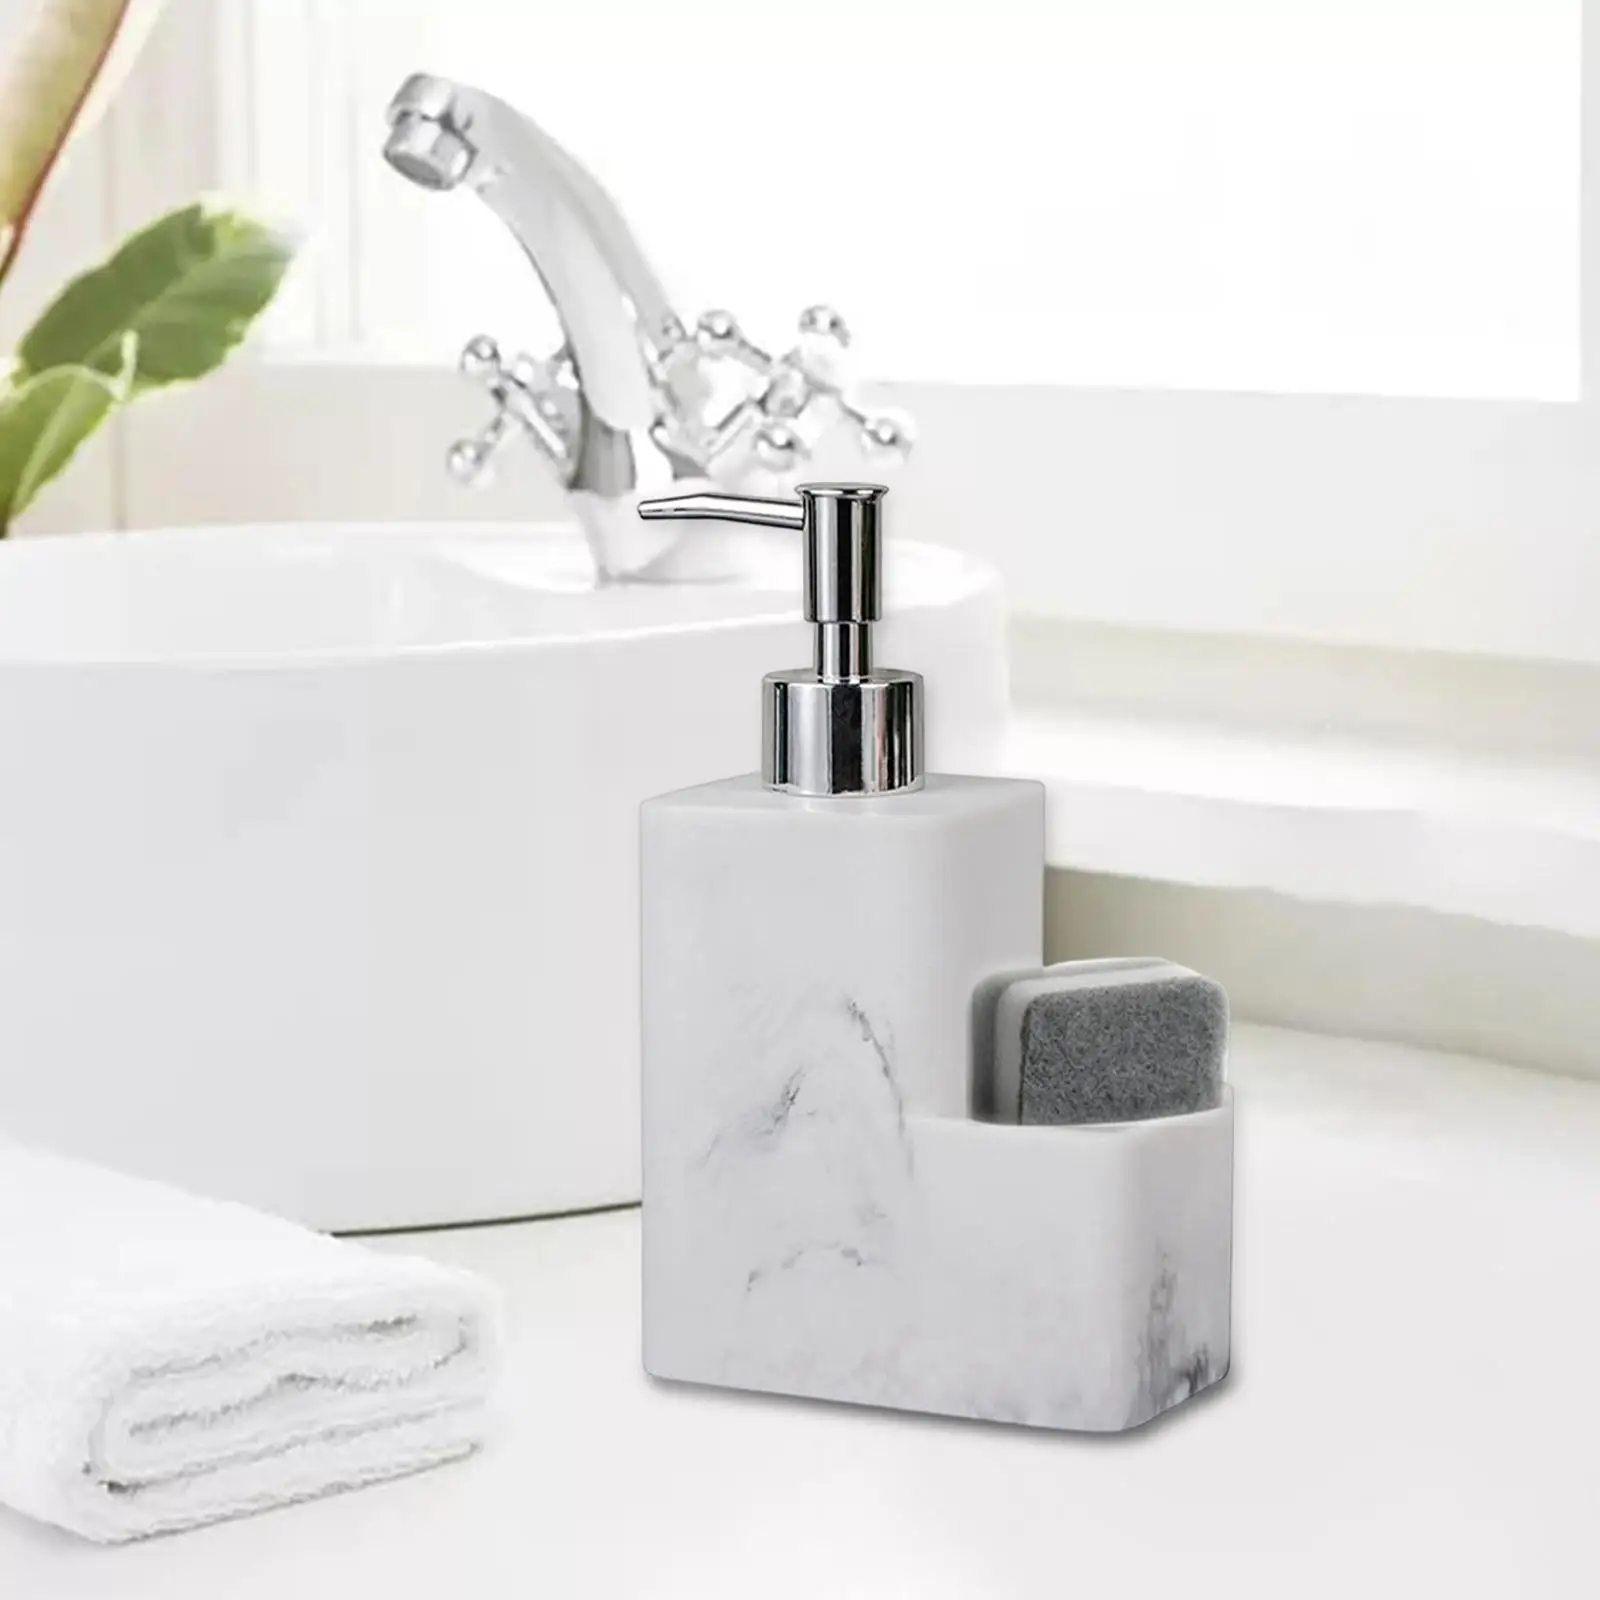 Refillable 350ml Dish Soap Dispenser Pump Bottle Marble Surface,Organizer Holder Stores Scrubbers for Countertop